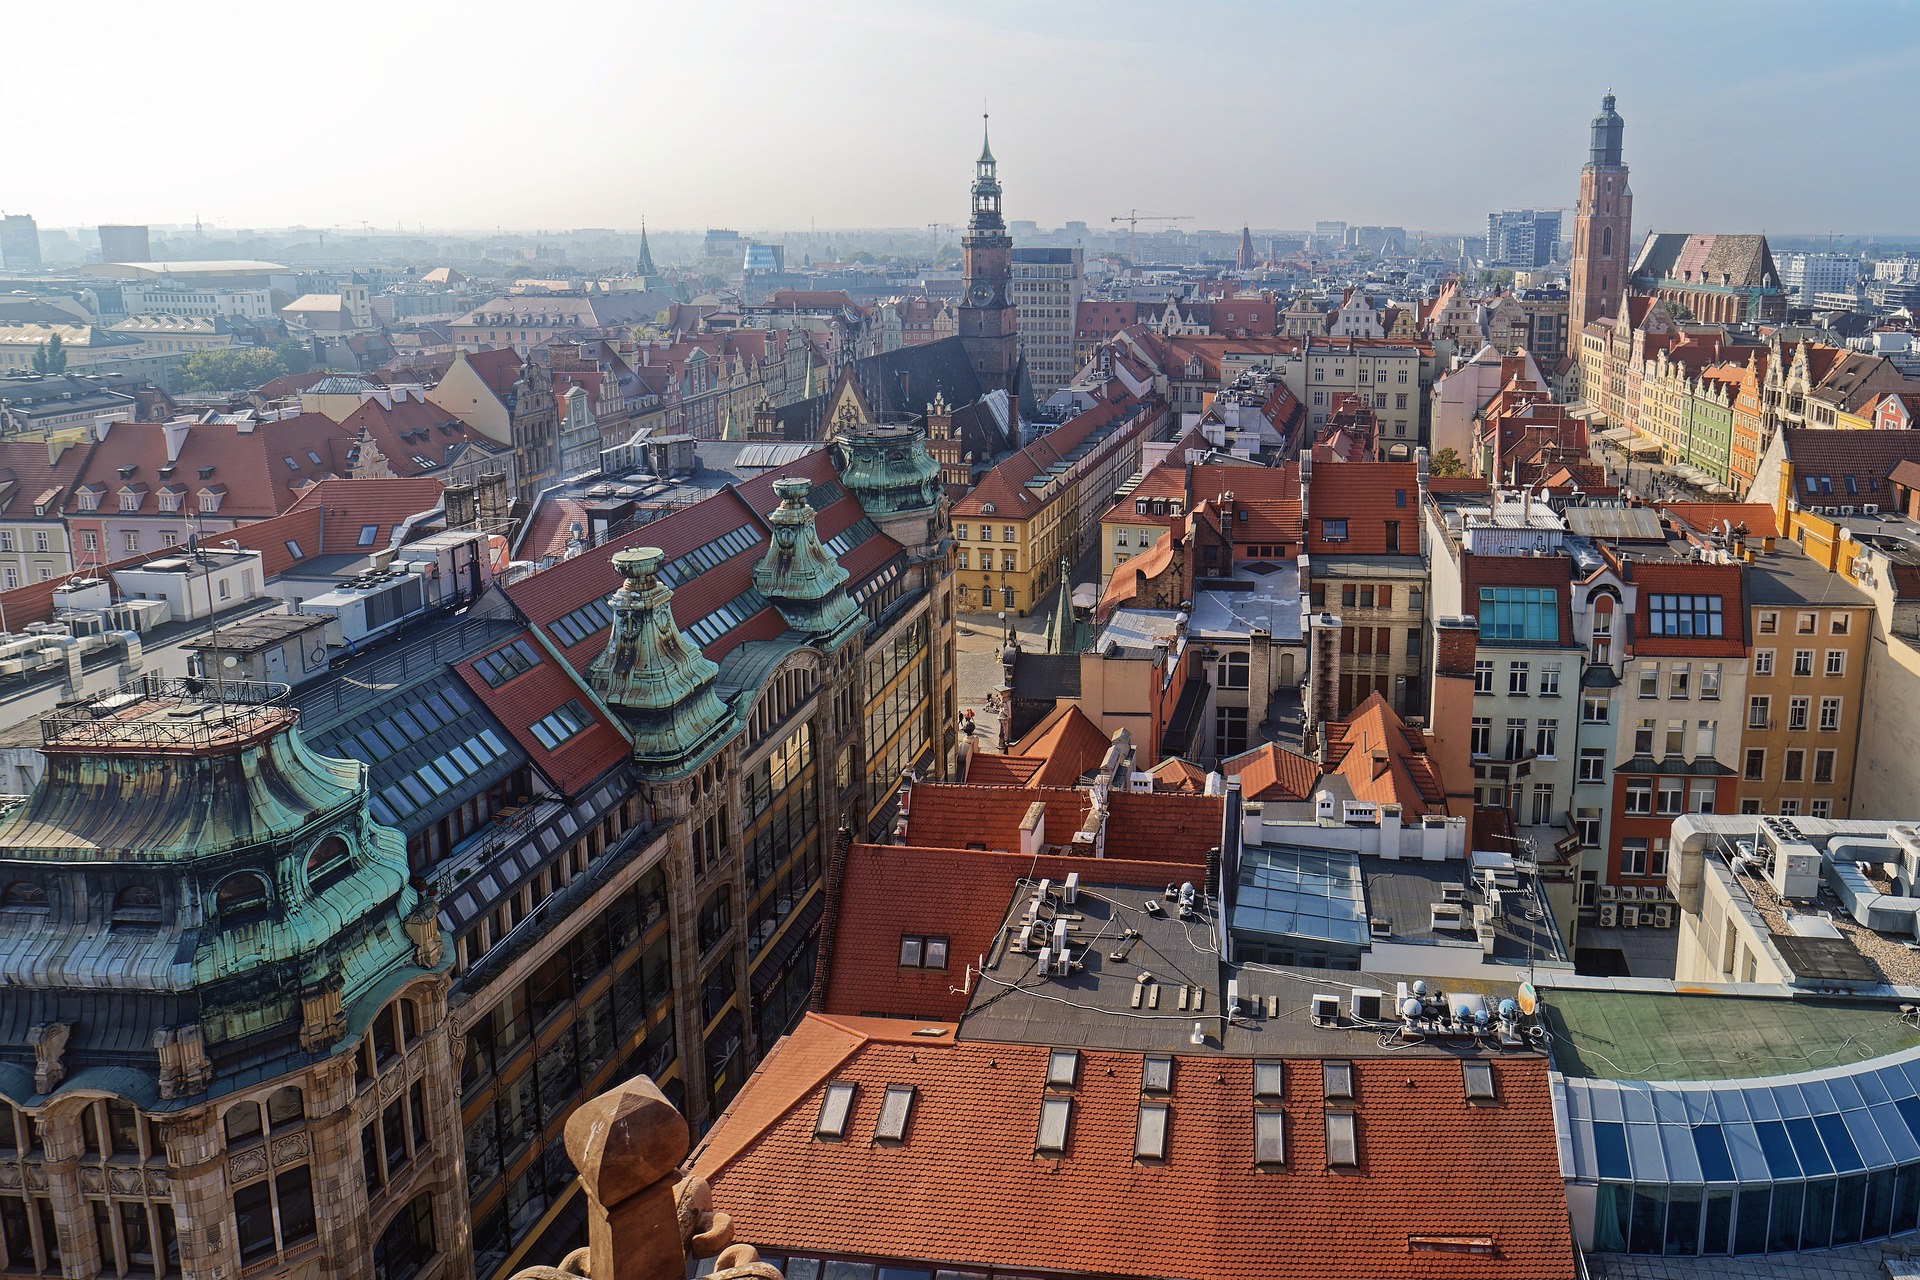 Frequently Asked Questions About Traveling to Wrocław